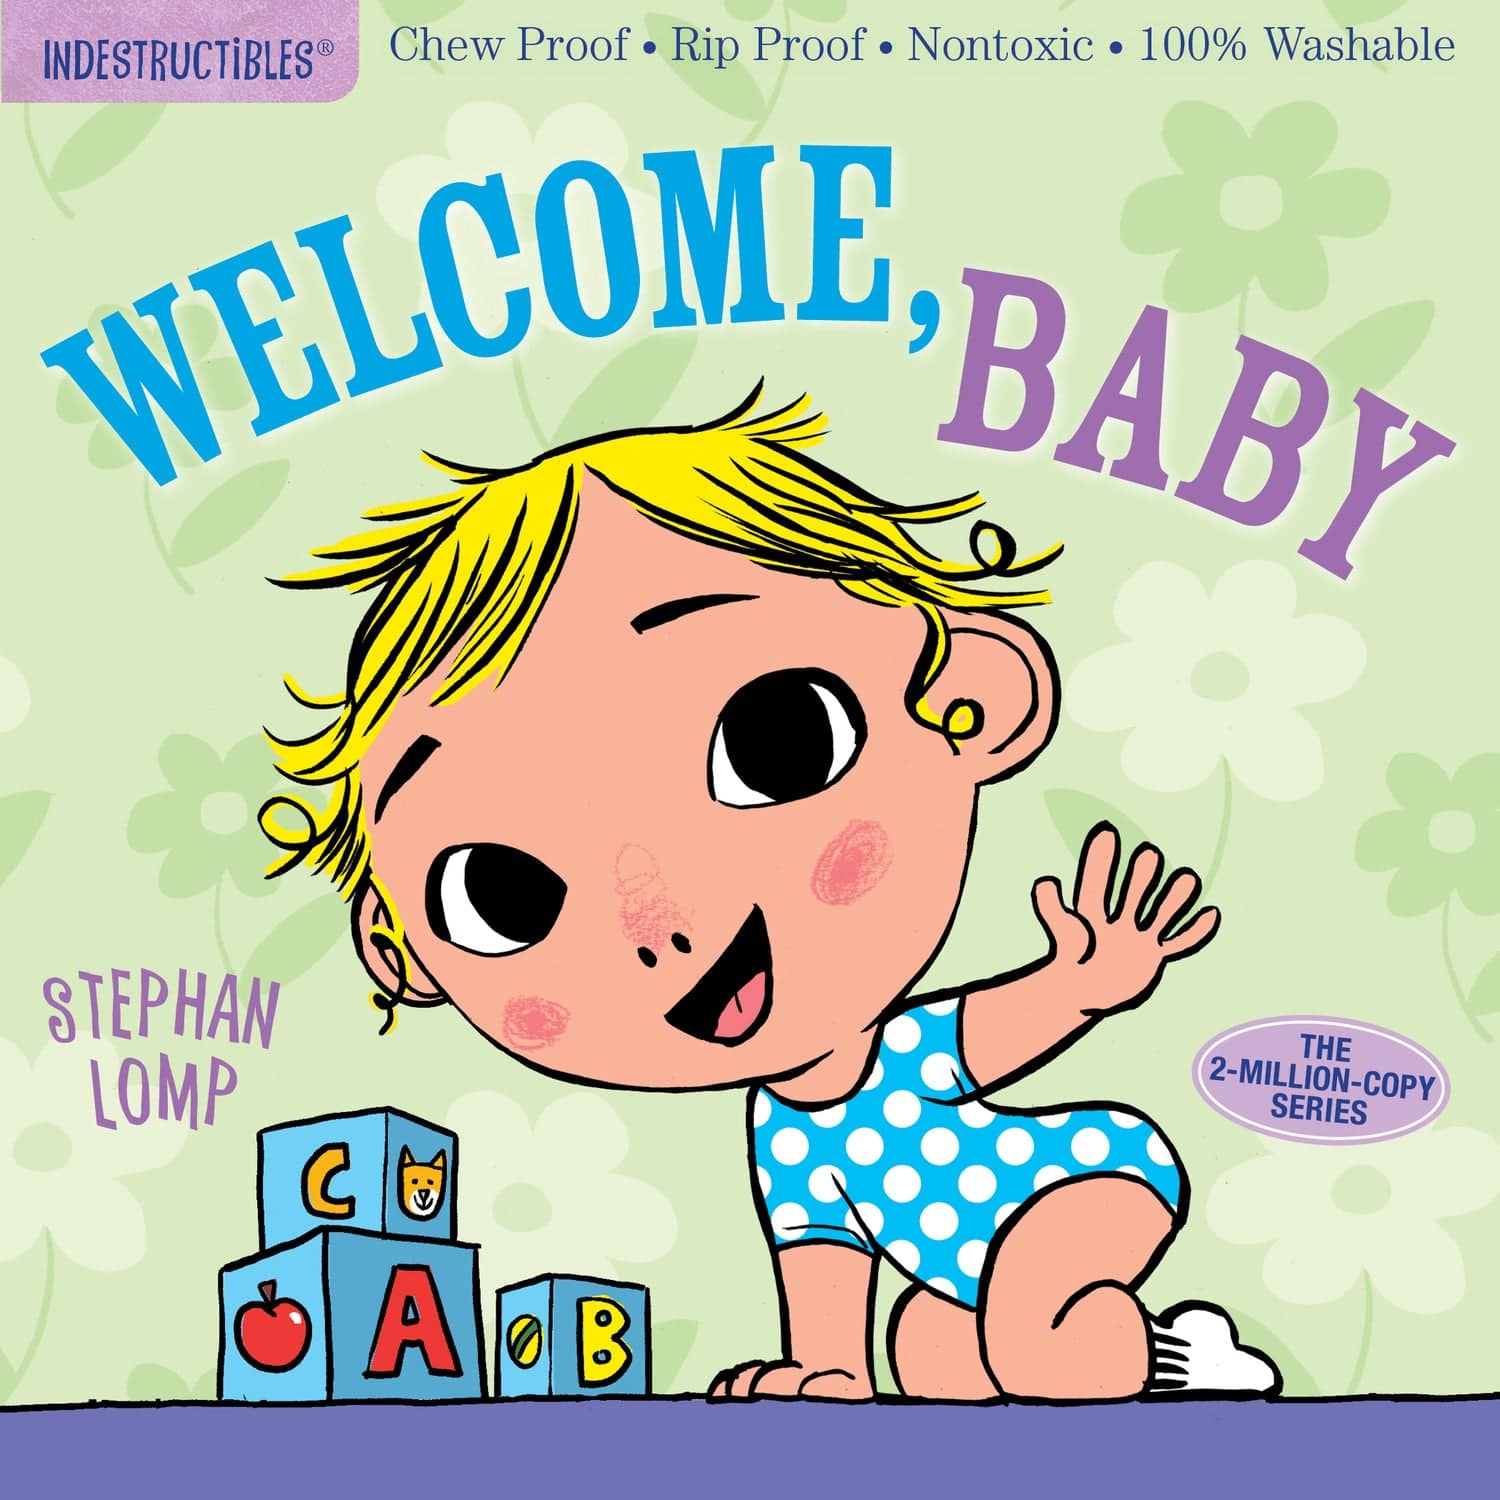 INDESTRUCTIBLES WELCOME BABY - A Child's Delight